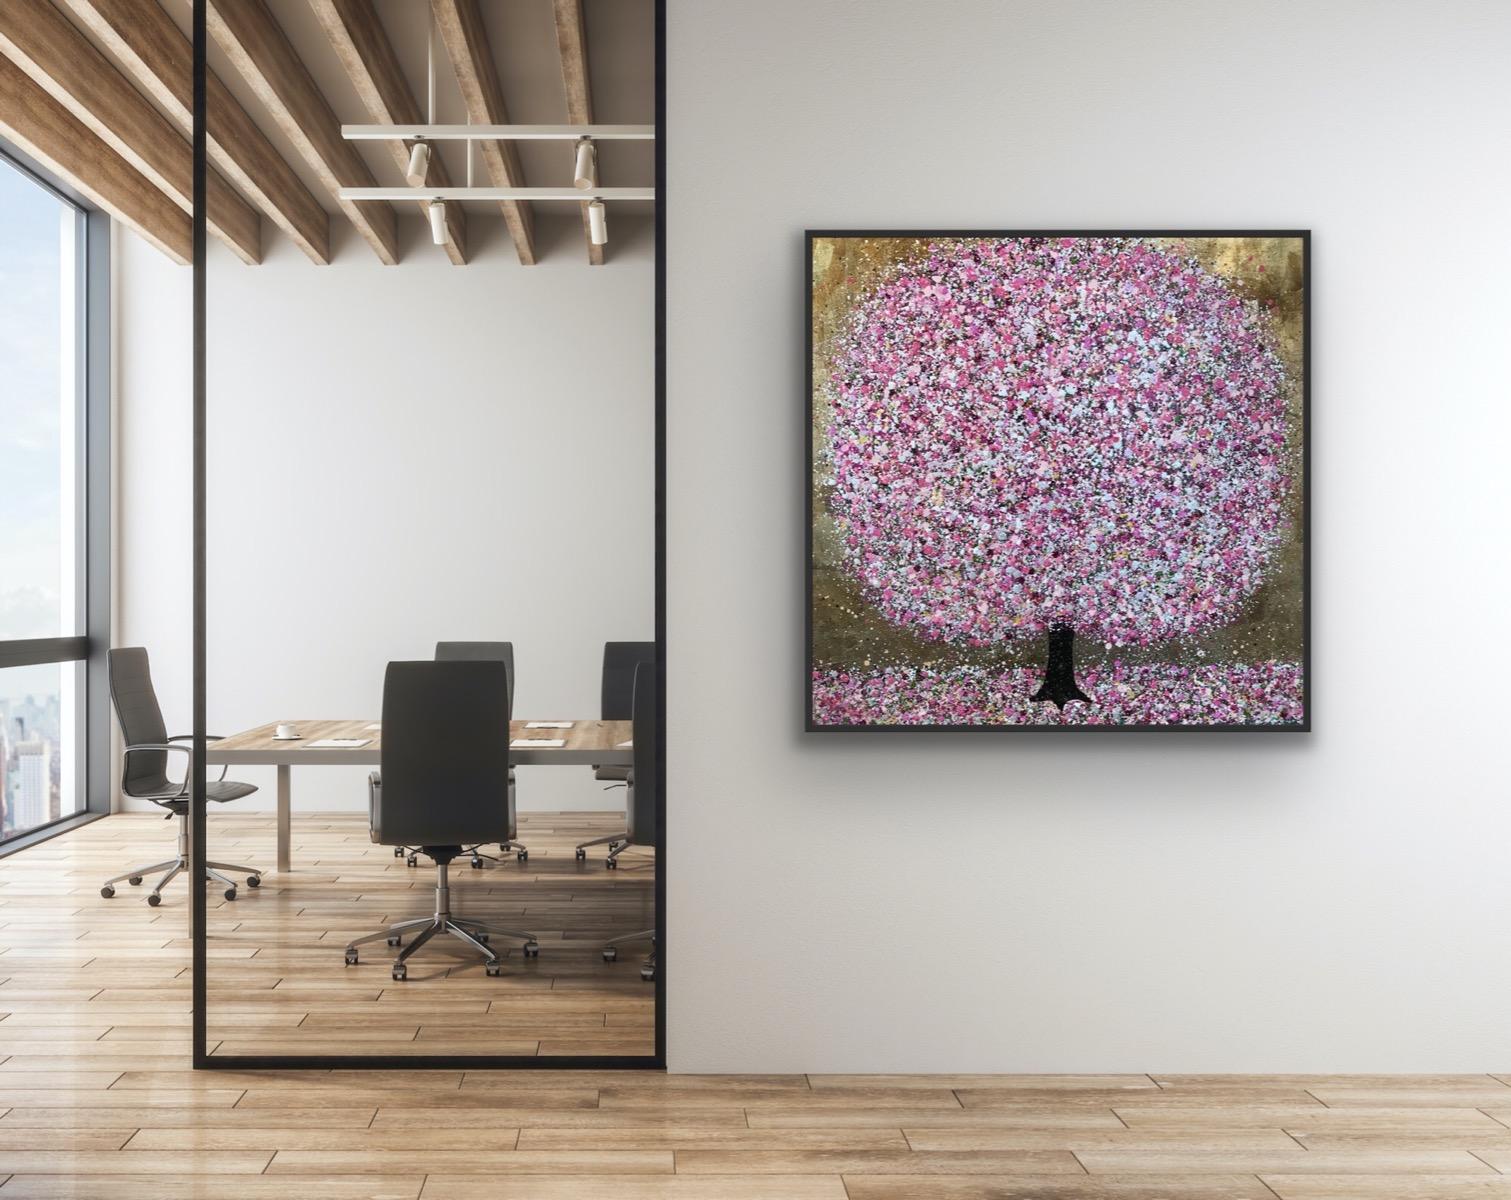 Spring Joy Nicky Chubb Original painting Acrylic on canvas.

Additional Information:
Acrylic
Size: 76x76x4 cm

Please Note That Insitu Images Are Purely An Indication Of How A Piece May Look

Artist Biography:
Nicky was born in Durham in 1969 and